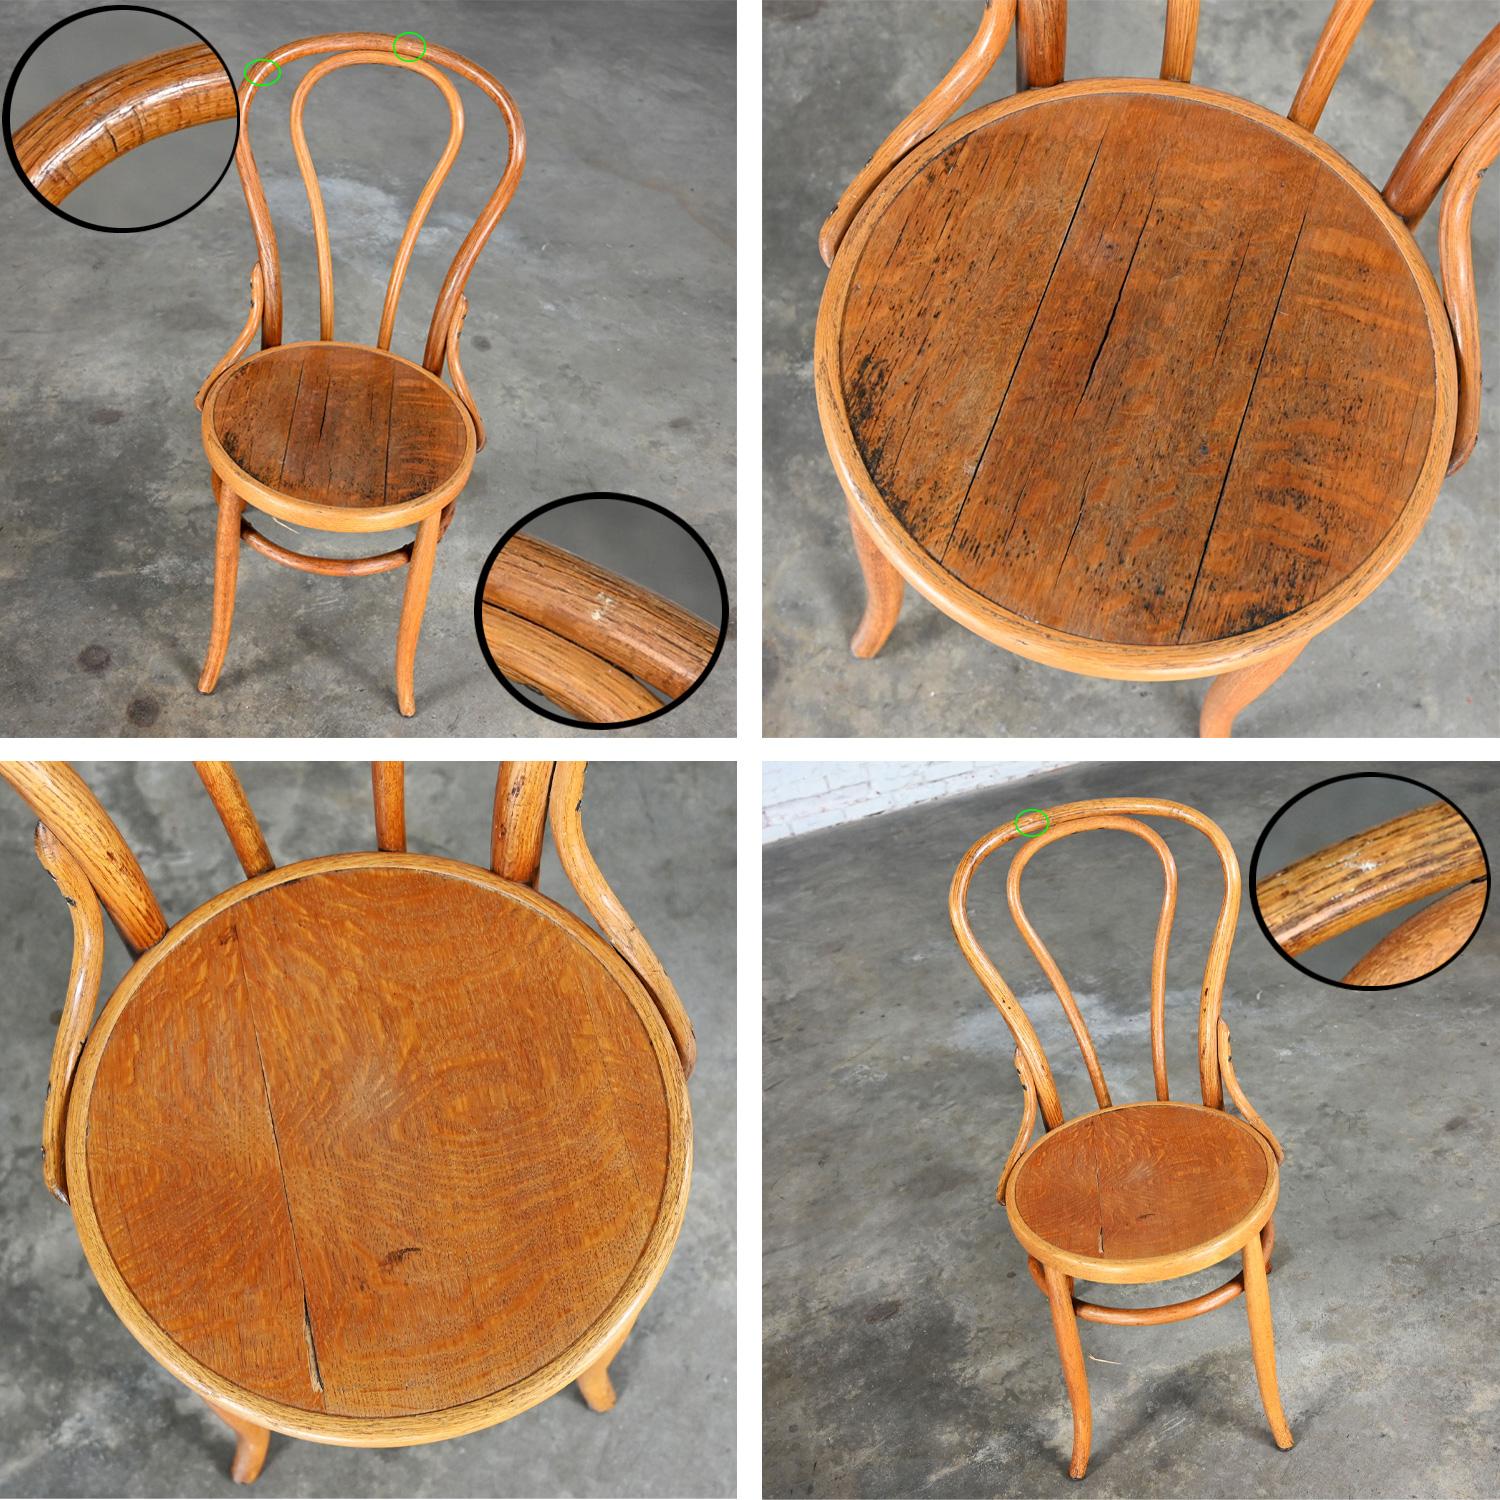 Bauhaus Oak Bentwood Chairs Attributed to Thonet #18 Café Chair Set of 6 For Sale 3